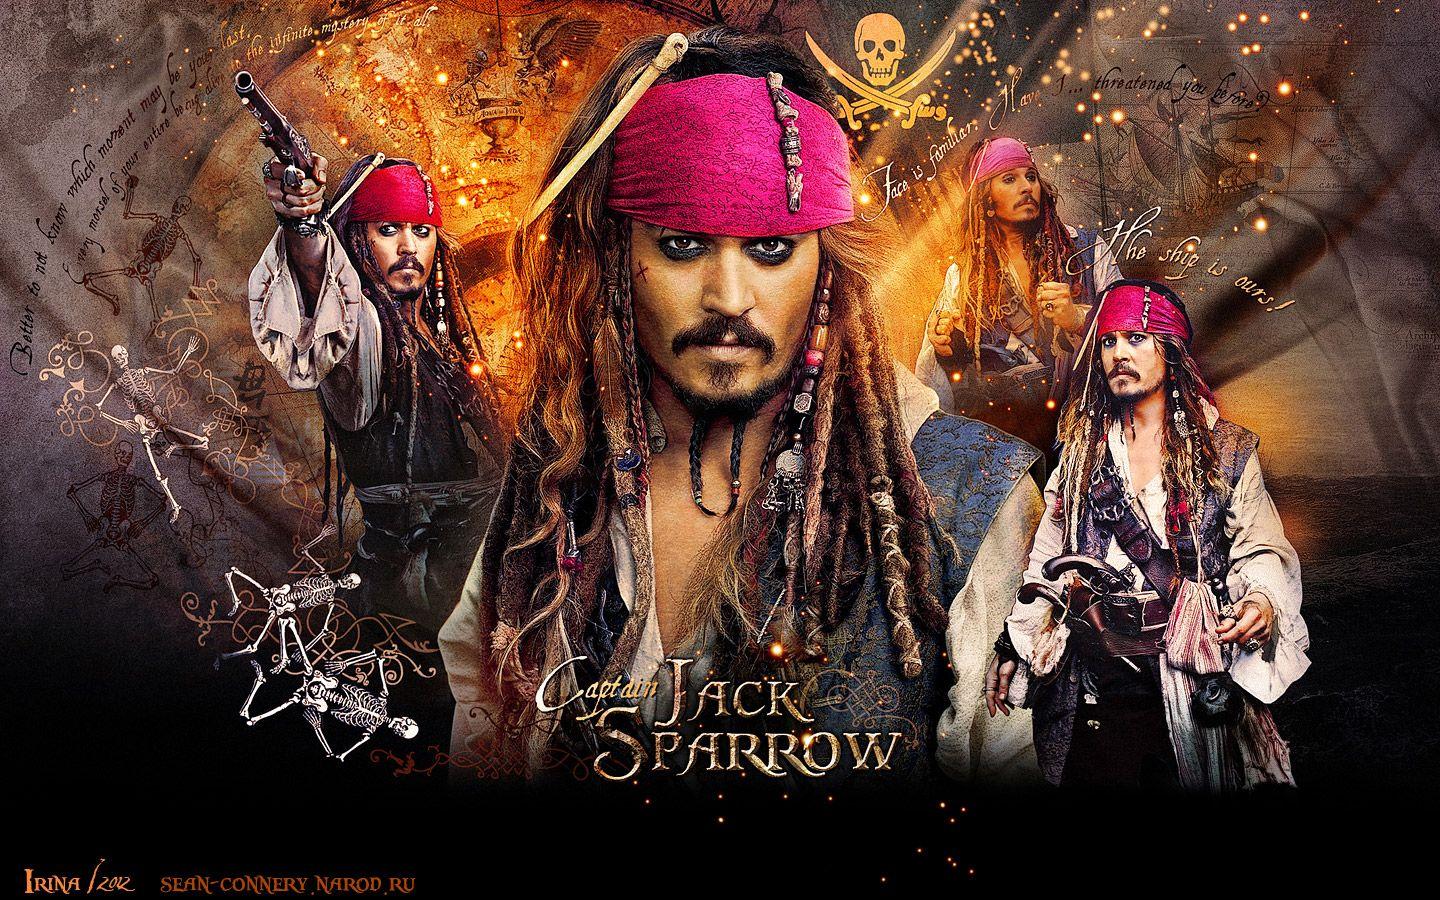 Pirates of the Caribbean Wallpapers - Top Free Pirates of the Caribbean  Backgrounds - WallpaperAccess